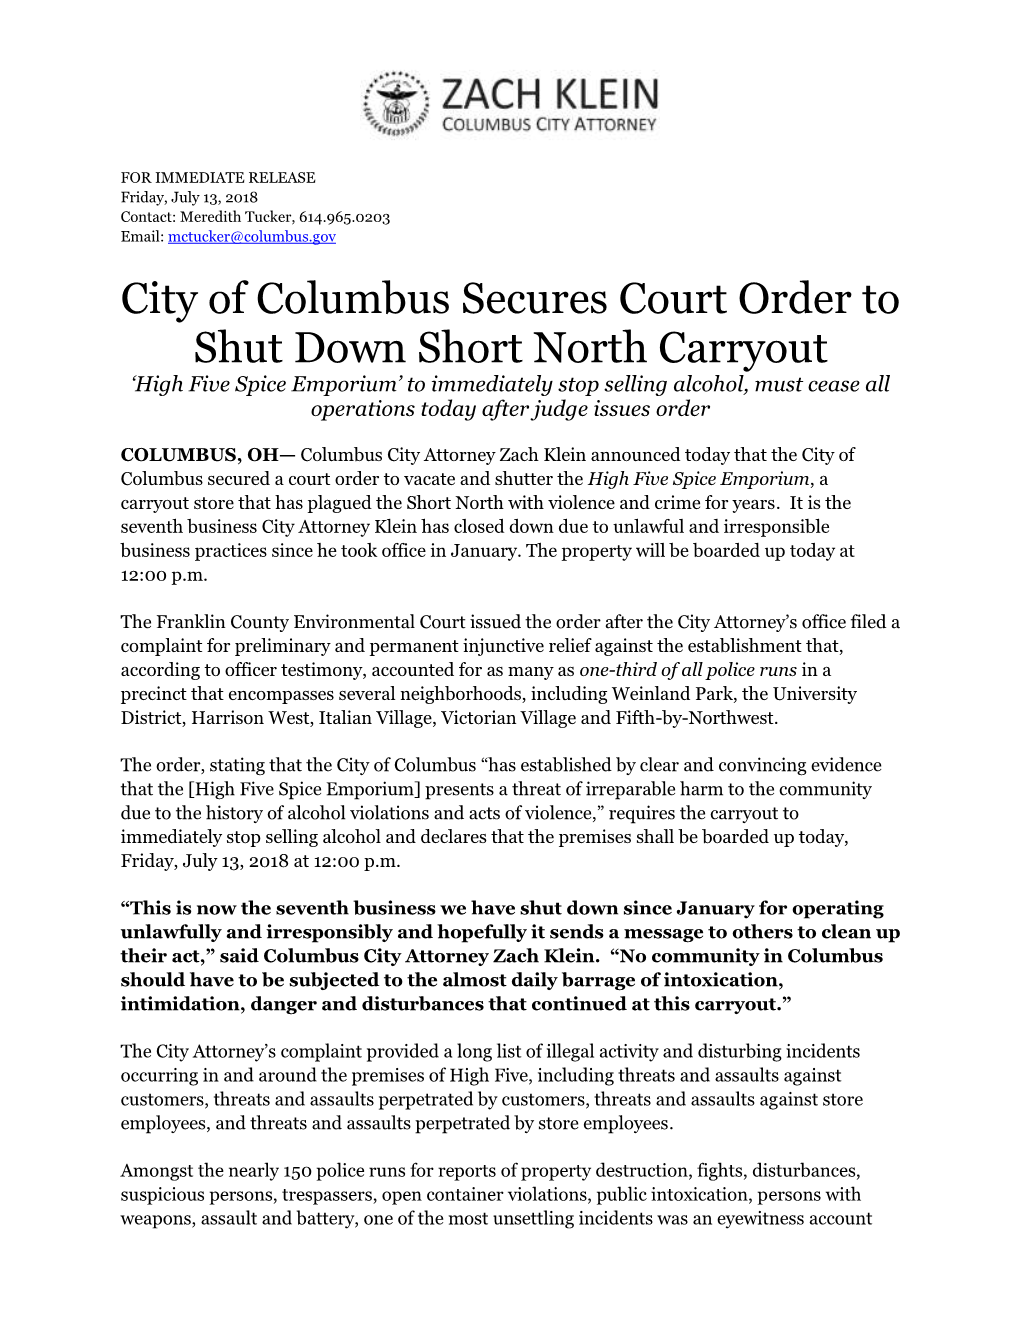 City of Columbus Secures Court Order to Shut Down Short North Carryout